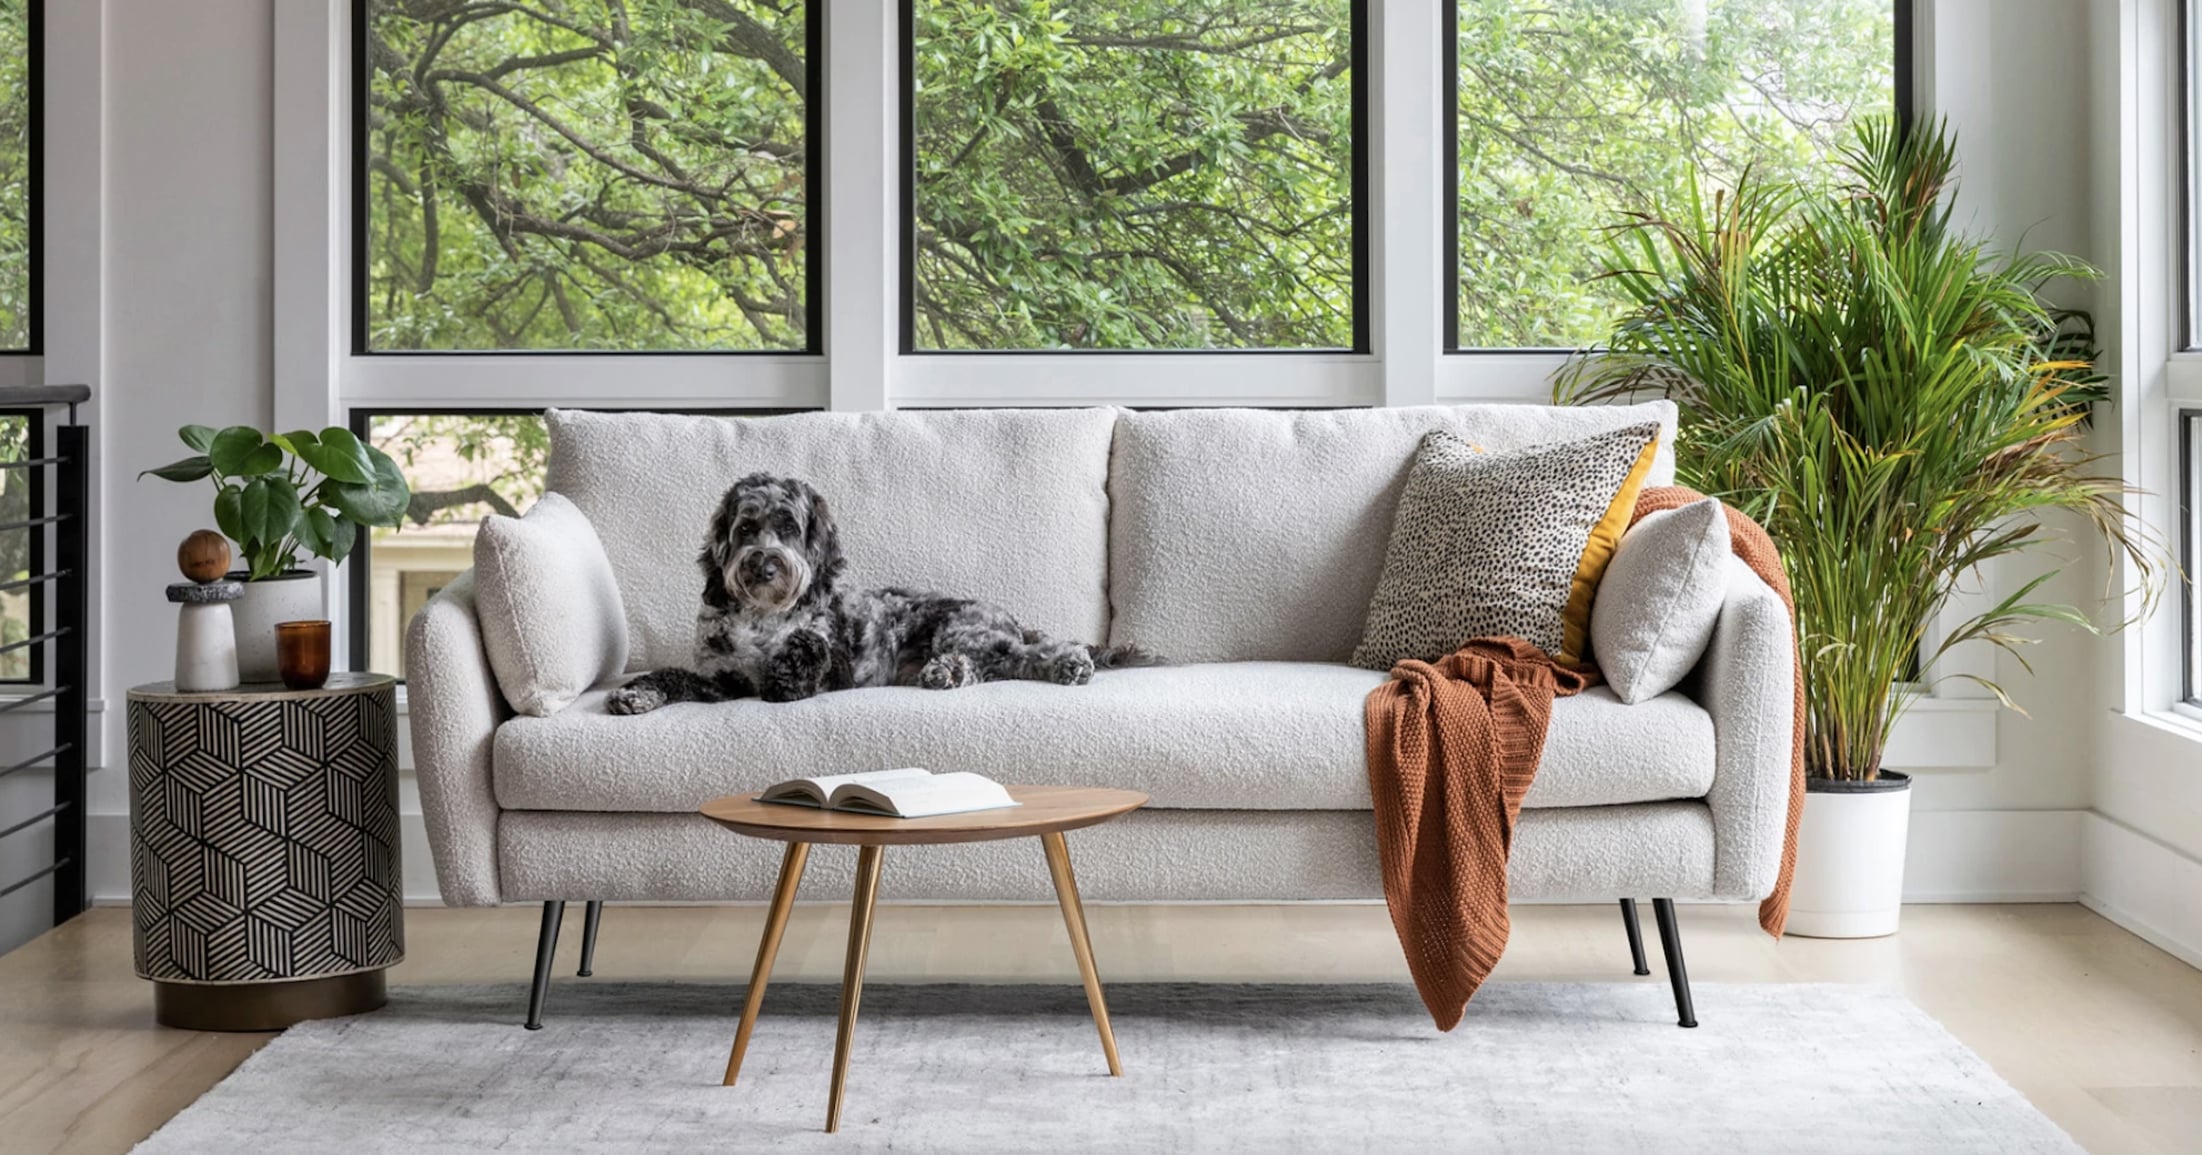 Albany Park’s Internet-Famous Sofas Are on Sale For Up to 35% Off — Shop Our Favorites